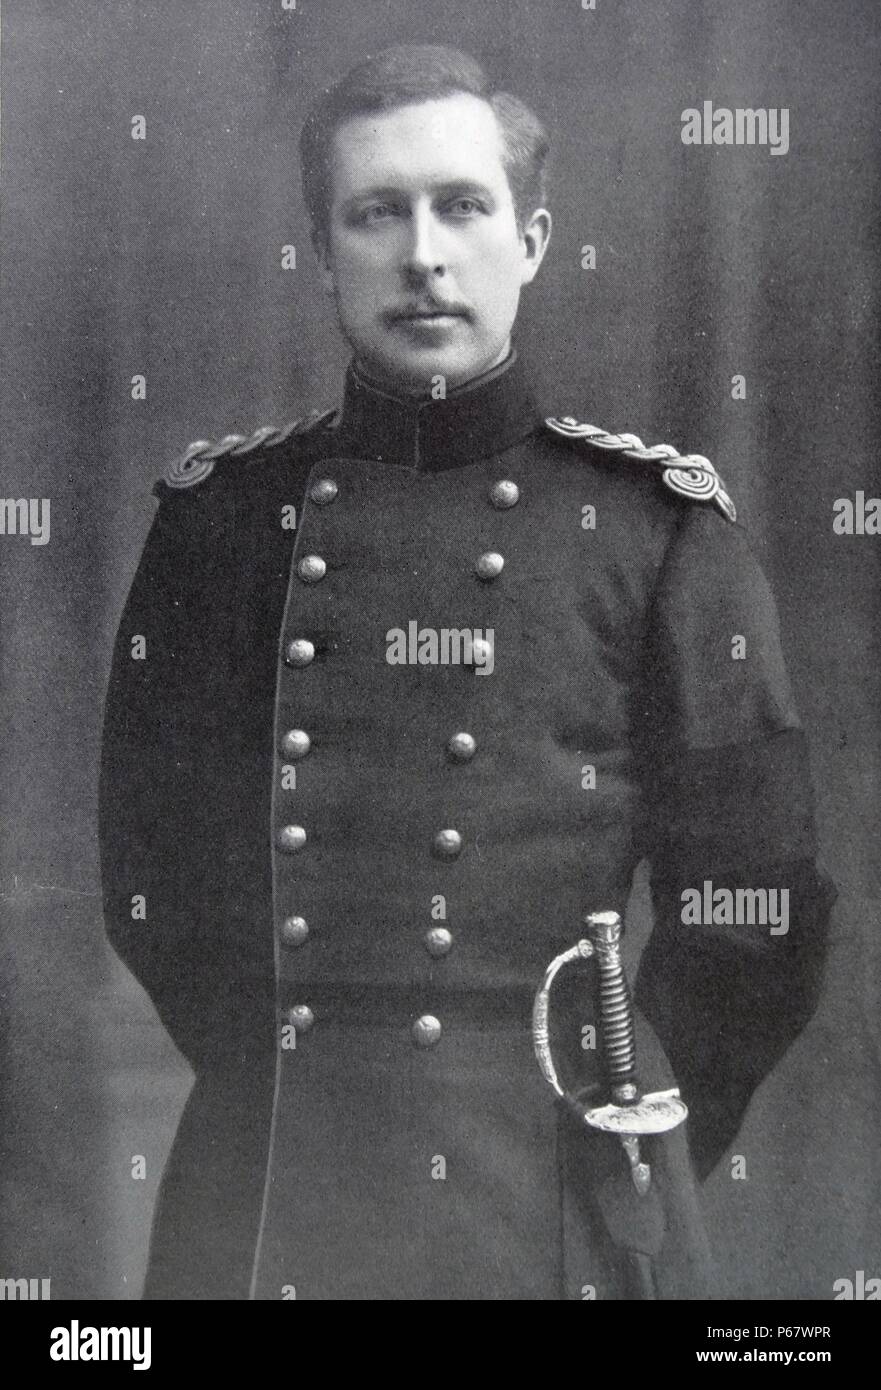 Albert I (April 8, 1875 – February 17, 1934) reigned as King of the Belgians from 1909 to 1934 Stock Photo